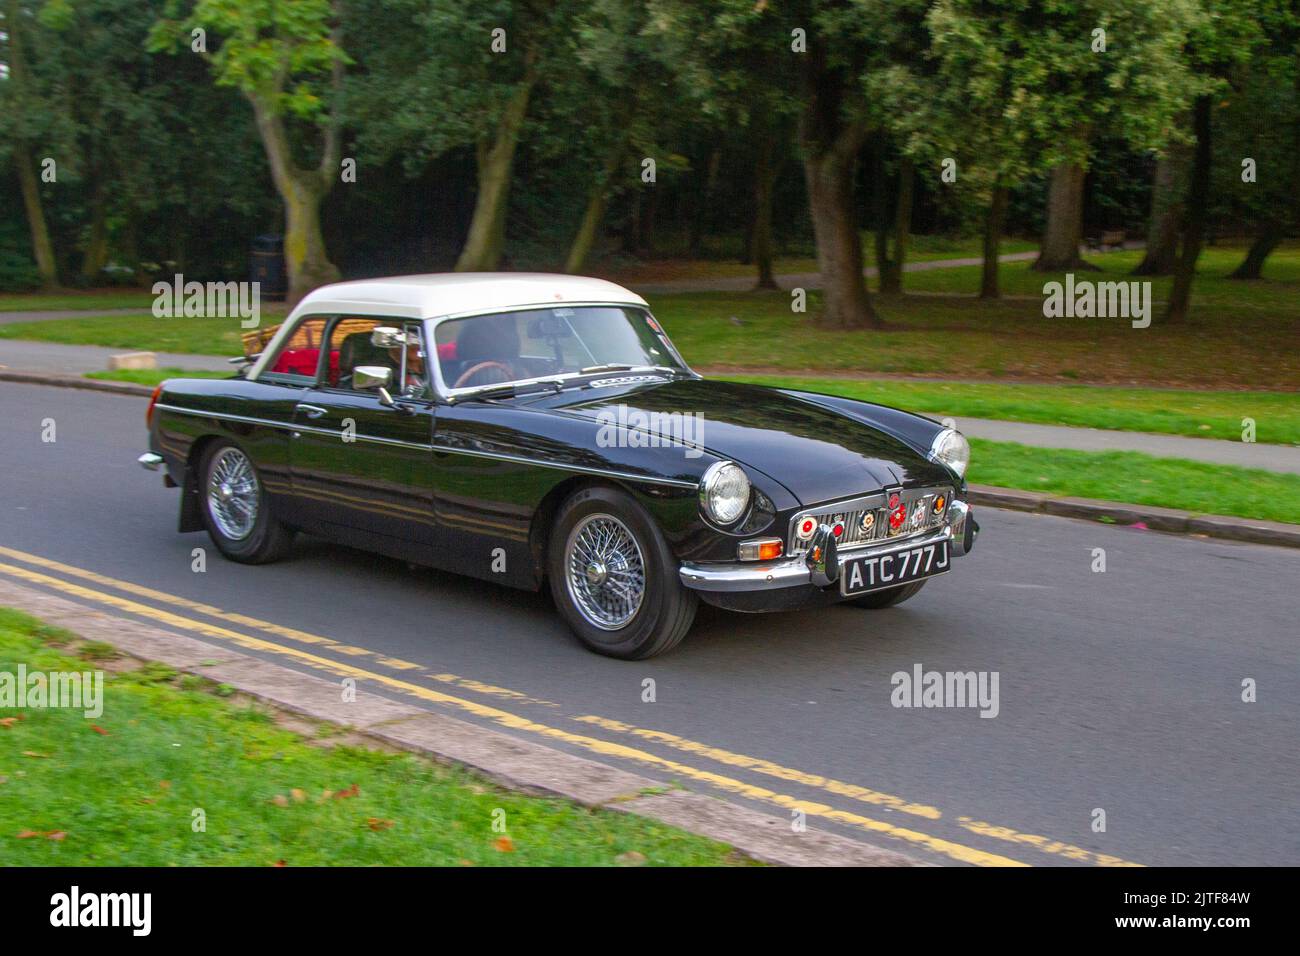 1970 70s seventies Black MG Roadster 1950cc petrol British sports car; Cars arriving at the annual Stanley Park Classic Car Show. Stanley Park classics yesteryear Motor Show is hosted by Blackpool Vintage Vehicle Preservation Group, UK. Stock Photo